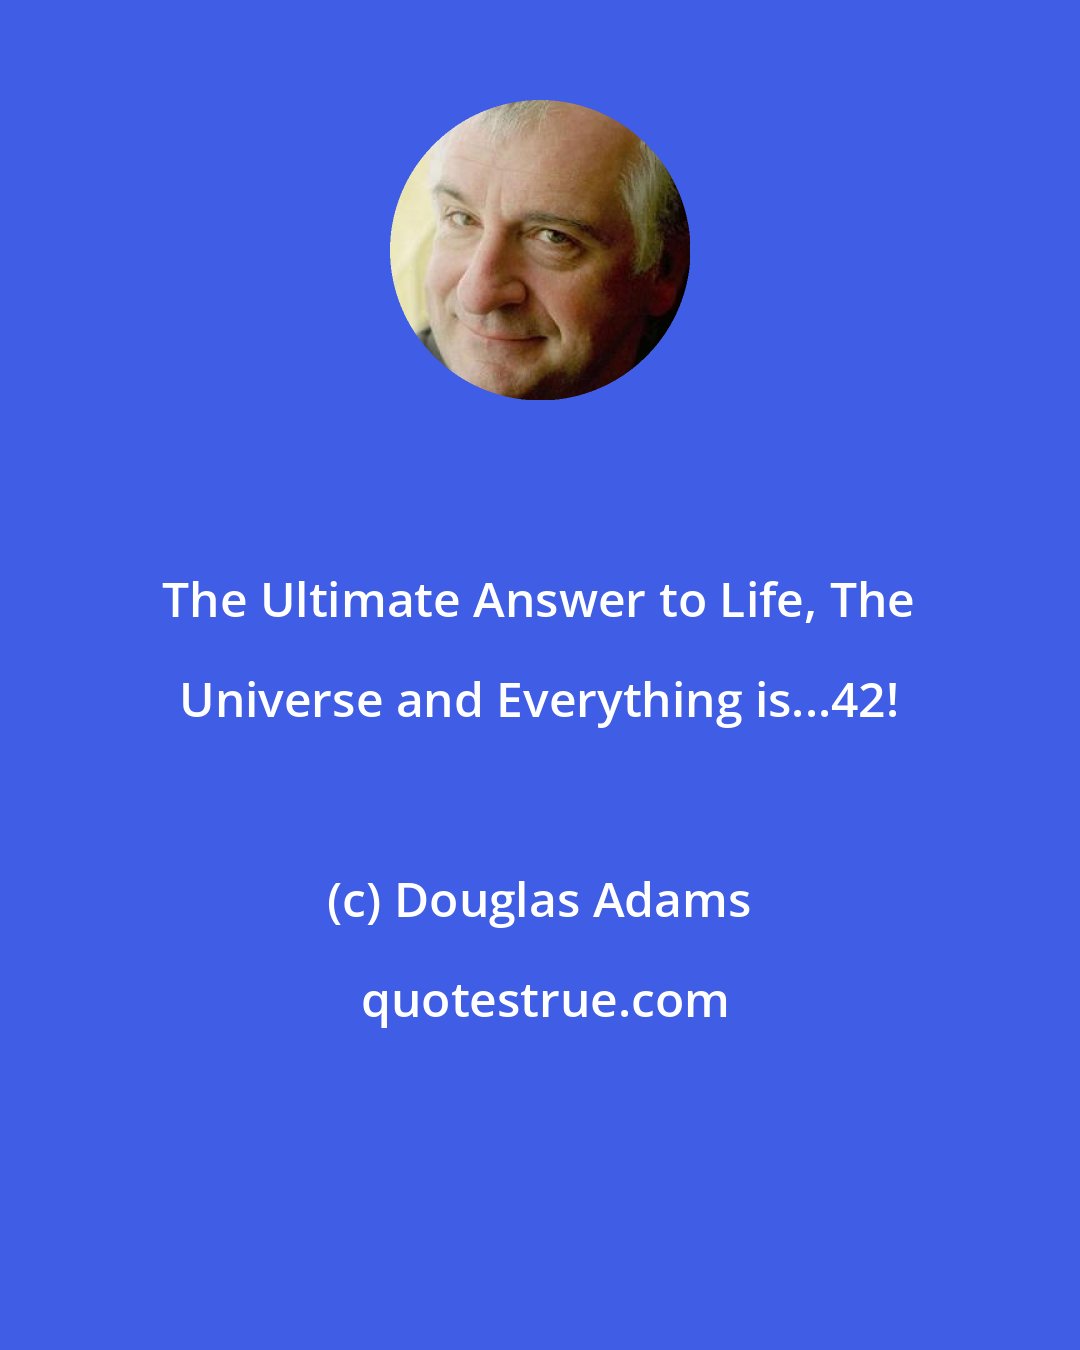 Douglas Adams: The Ultimate Answer to Life, The Universe and Everything is...42!